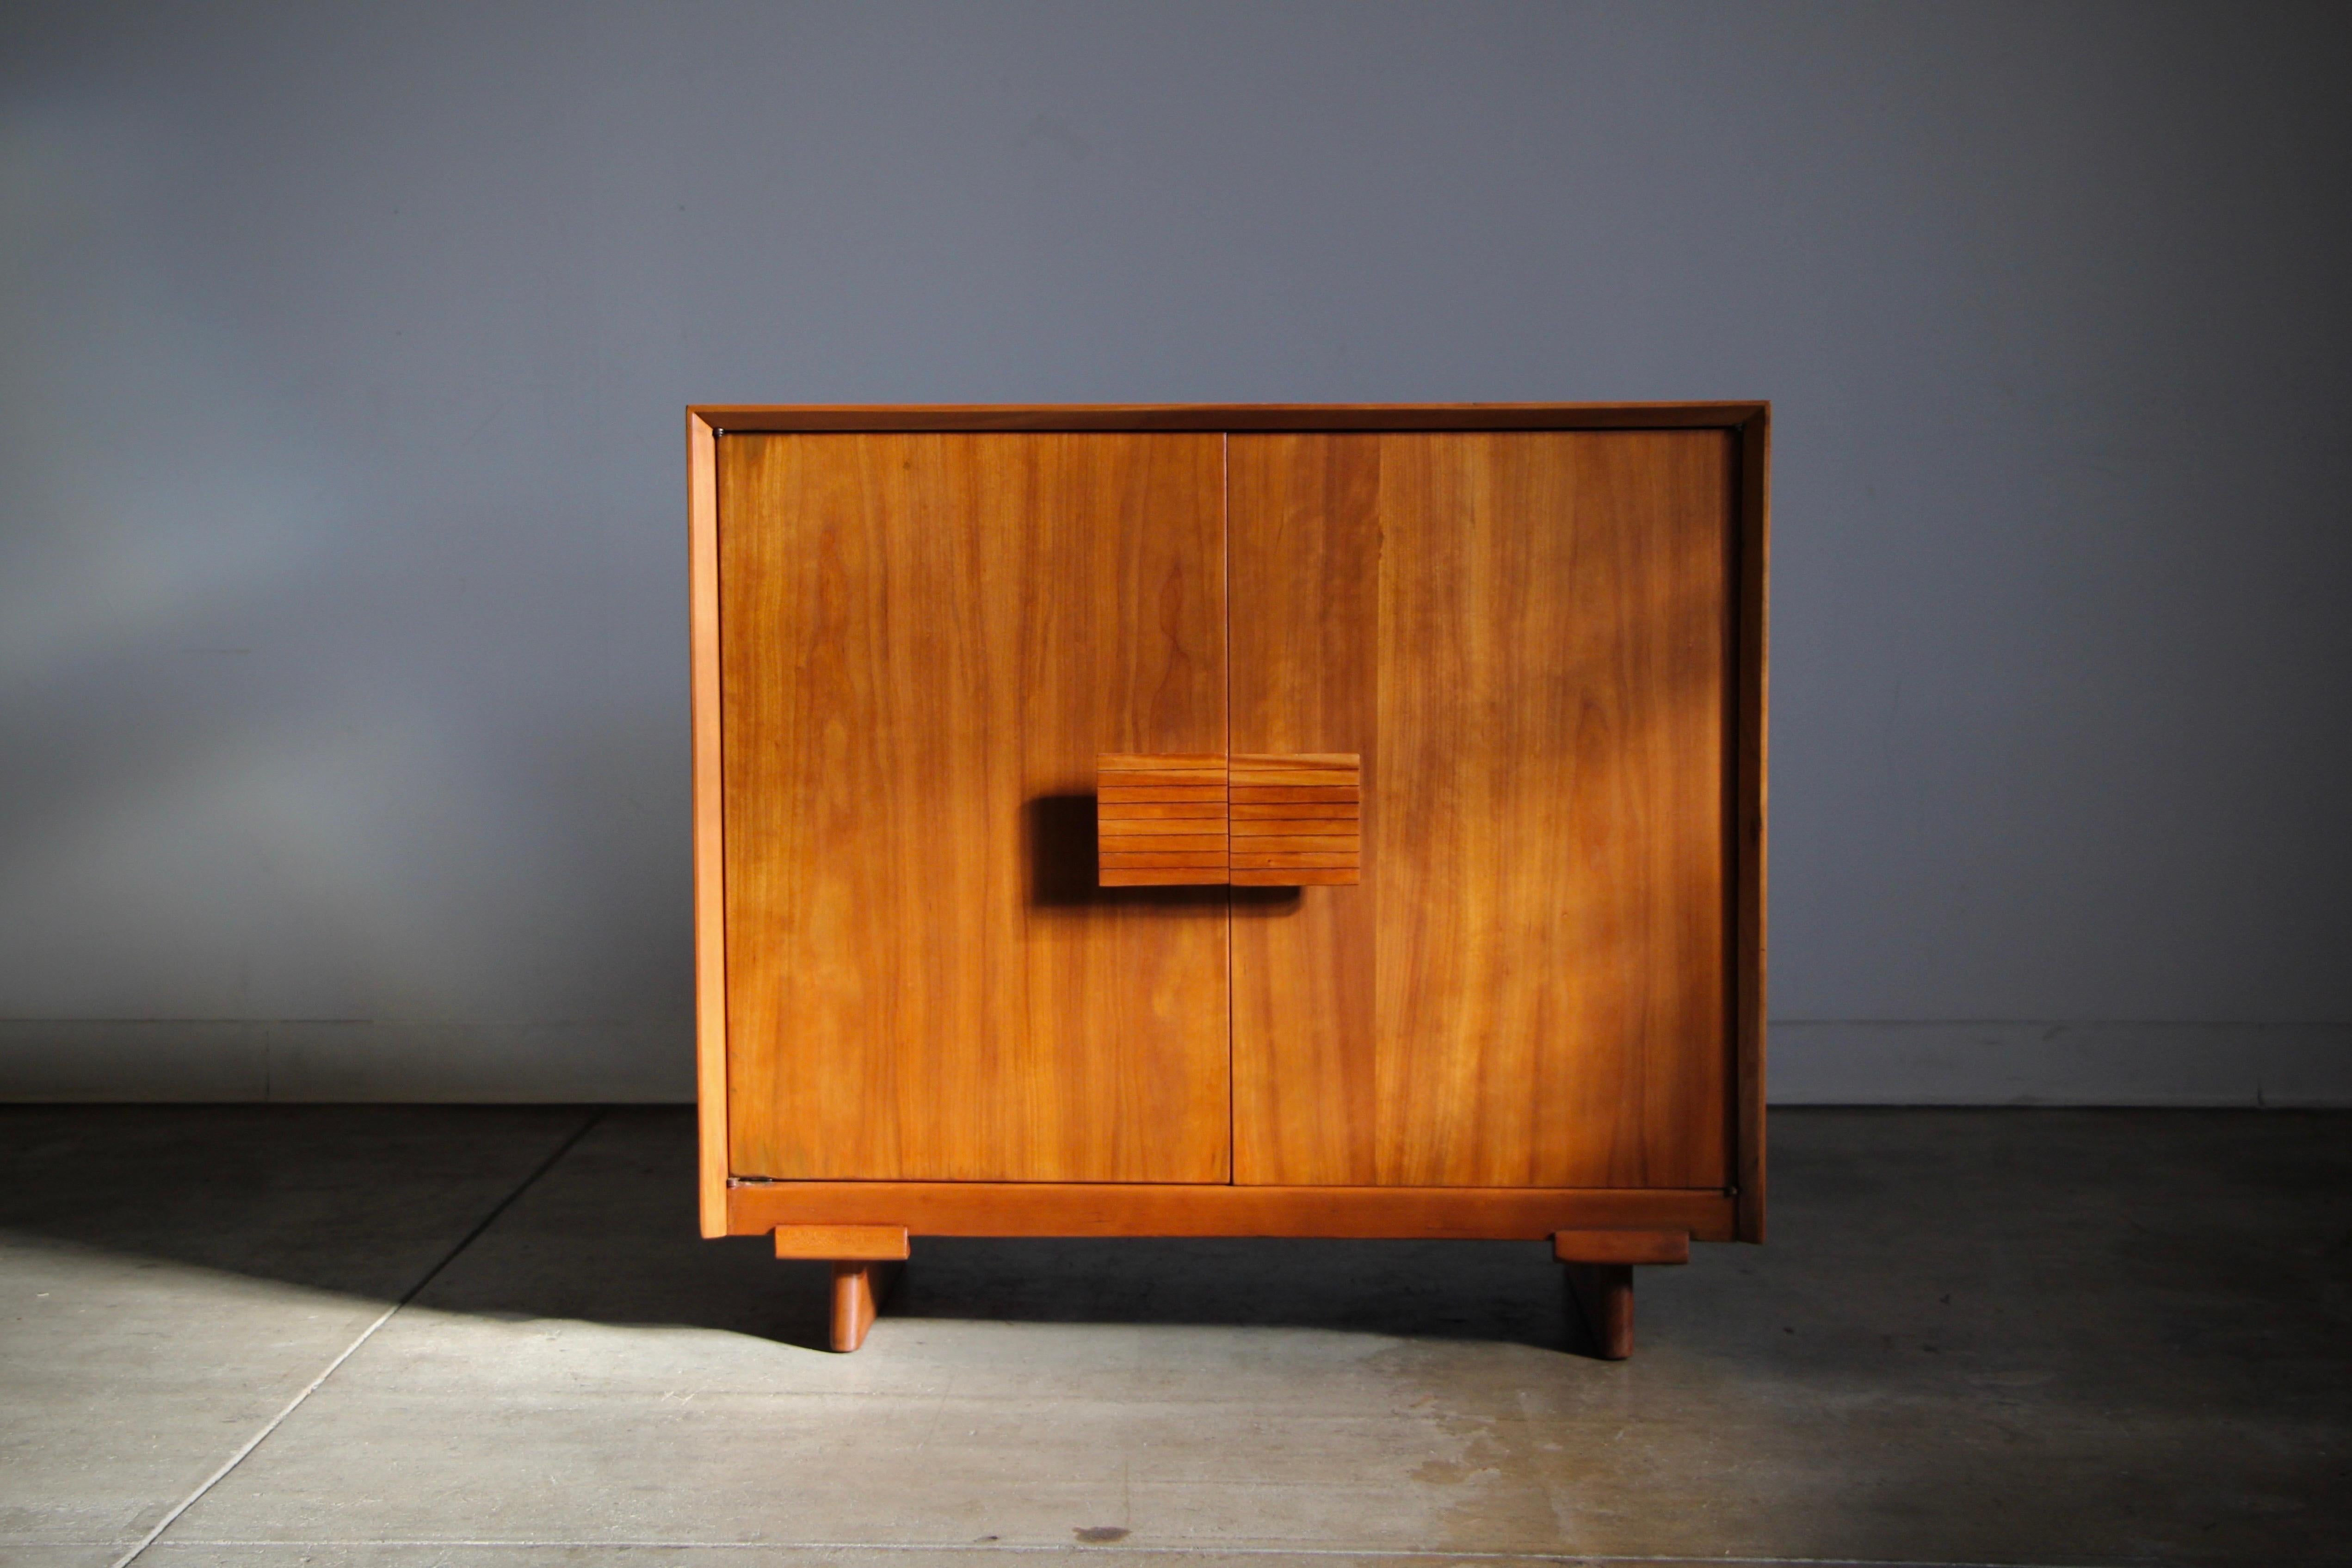 When Hans Knoll started his furniture company, he selected Jens Risom to design many of the first pieces for it. This bar cabinet, expertly crafted by Pennsylvania Dutch woodworkers out of local cherry wood in 1942, is one of the first pieces of